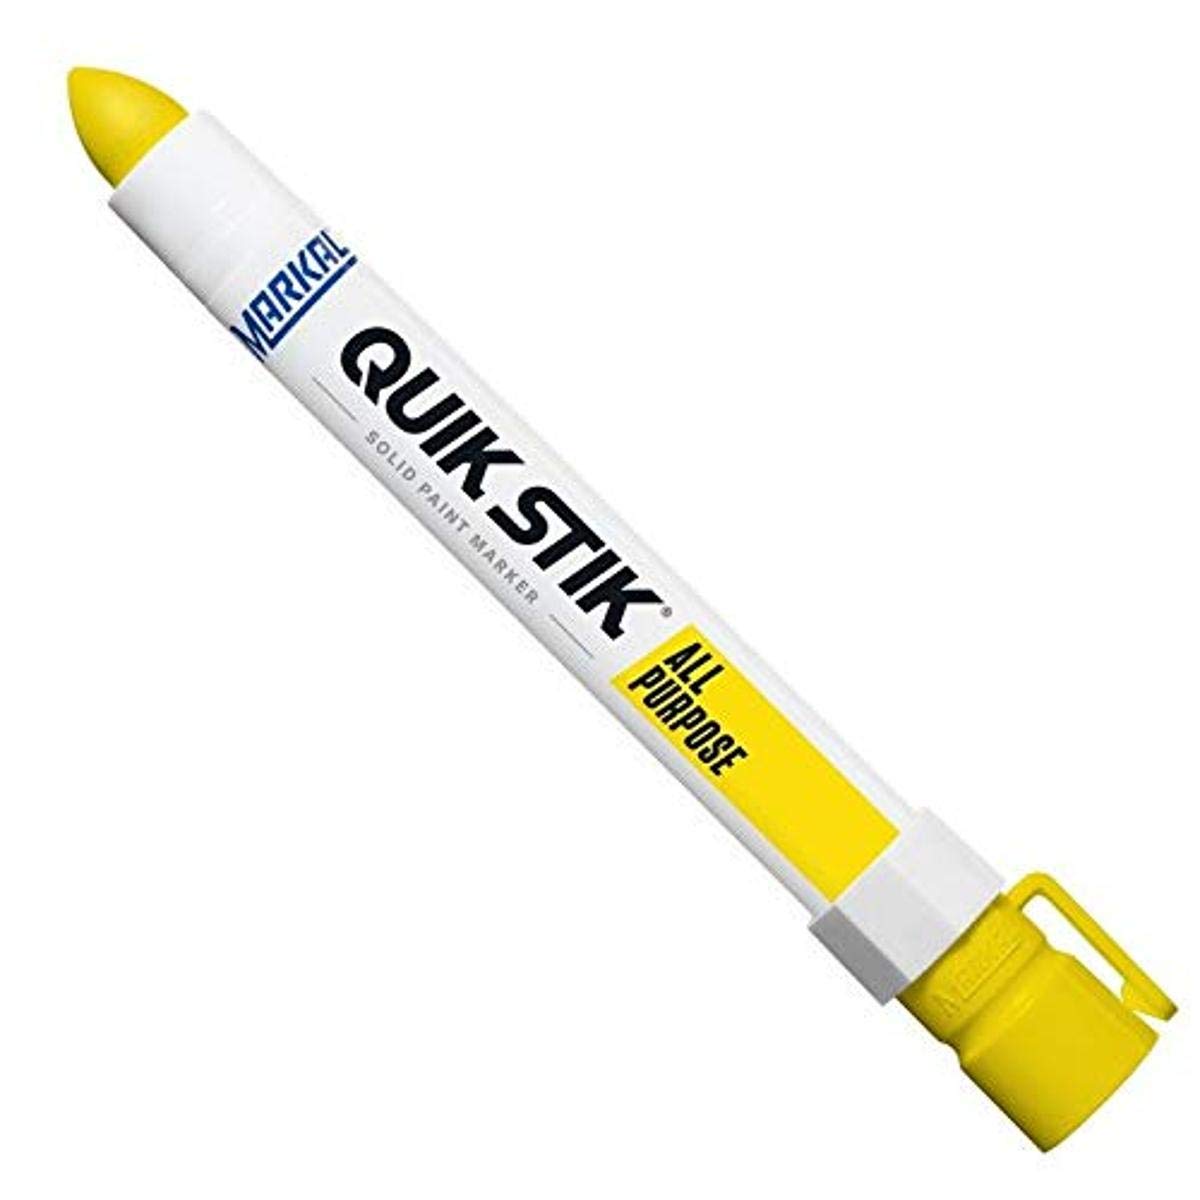 Markal Yellow Quik Stik All Purpose Solid Paint Marker (61053)